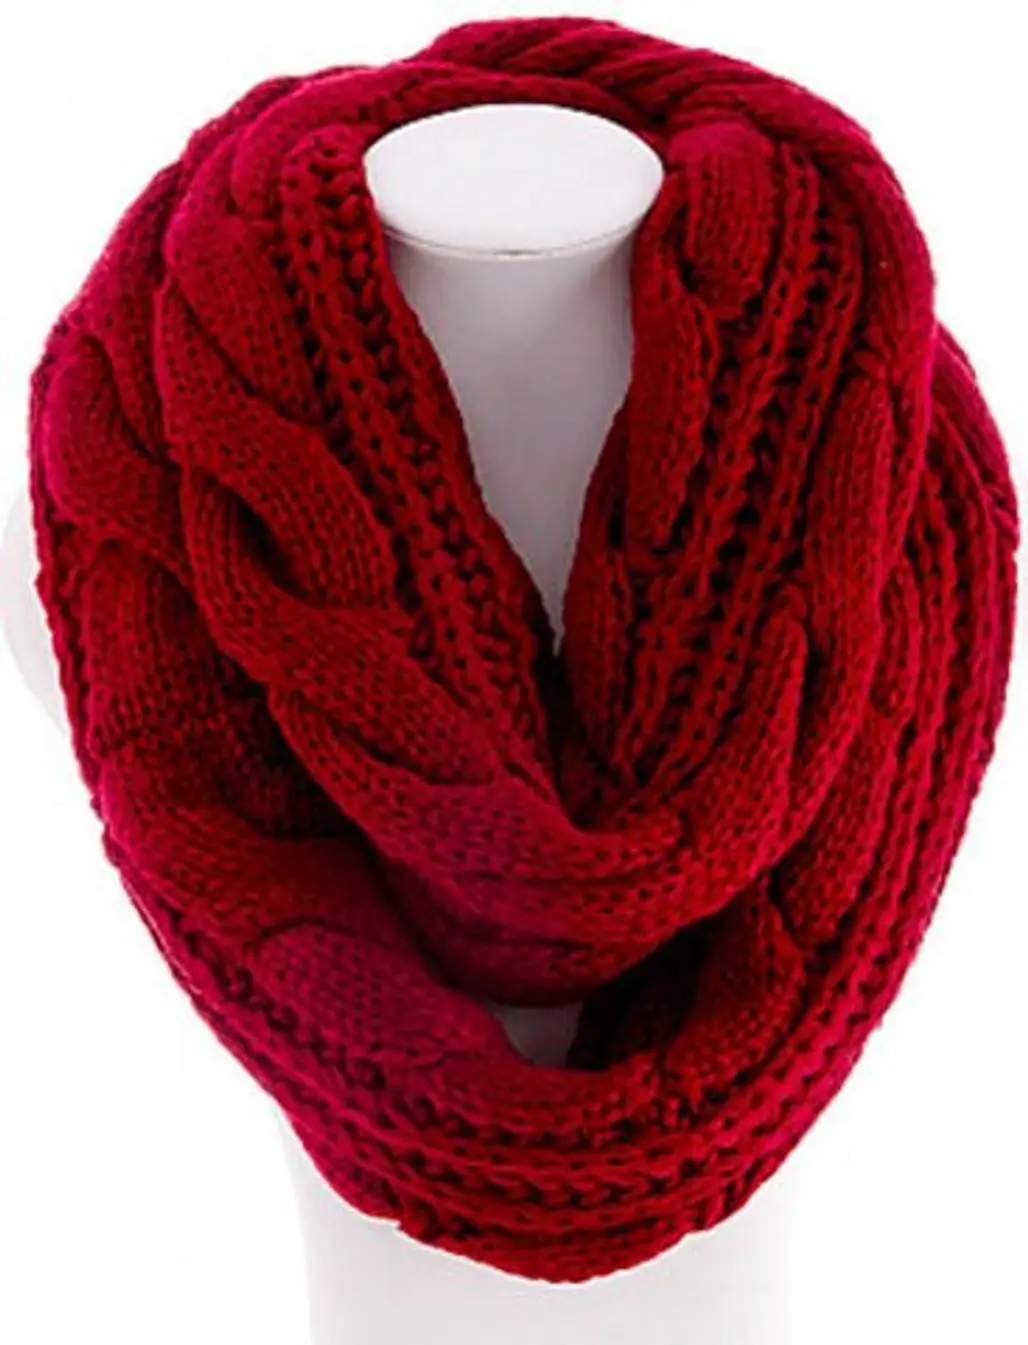 Cozy Red Soft Cable Knit Infinity Scarf